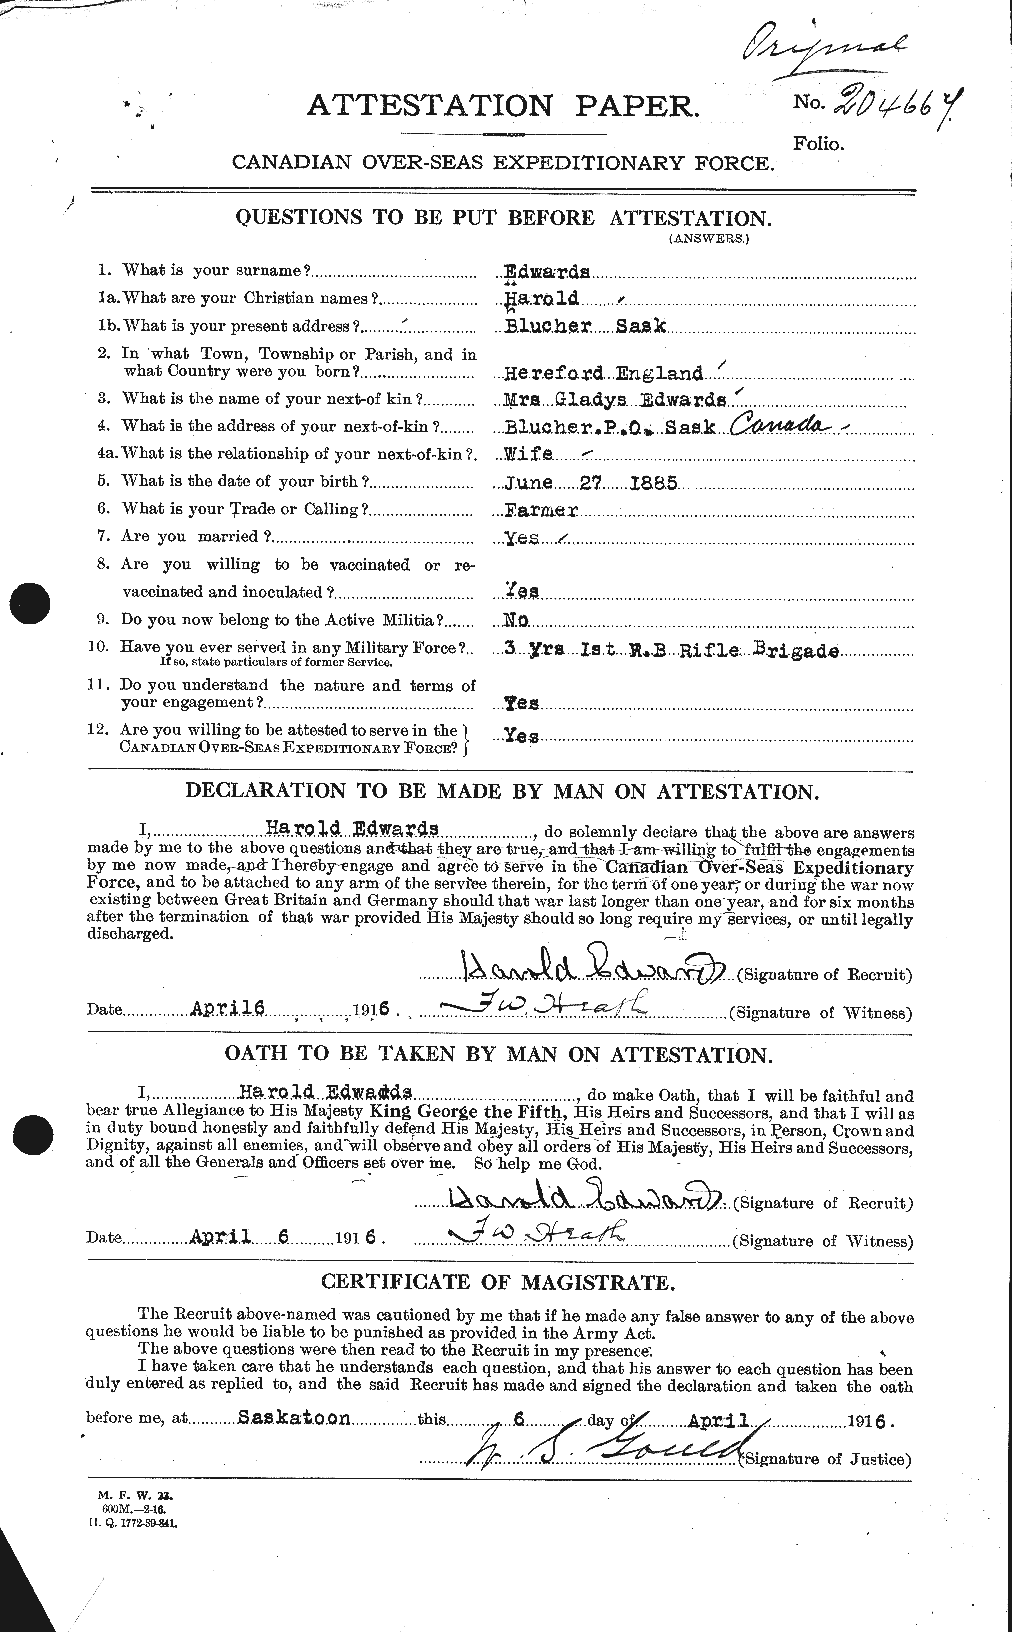 Personnel Records of the First World War - CEF 309713a